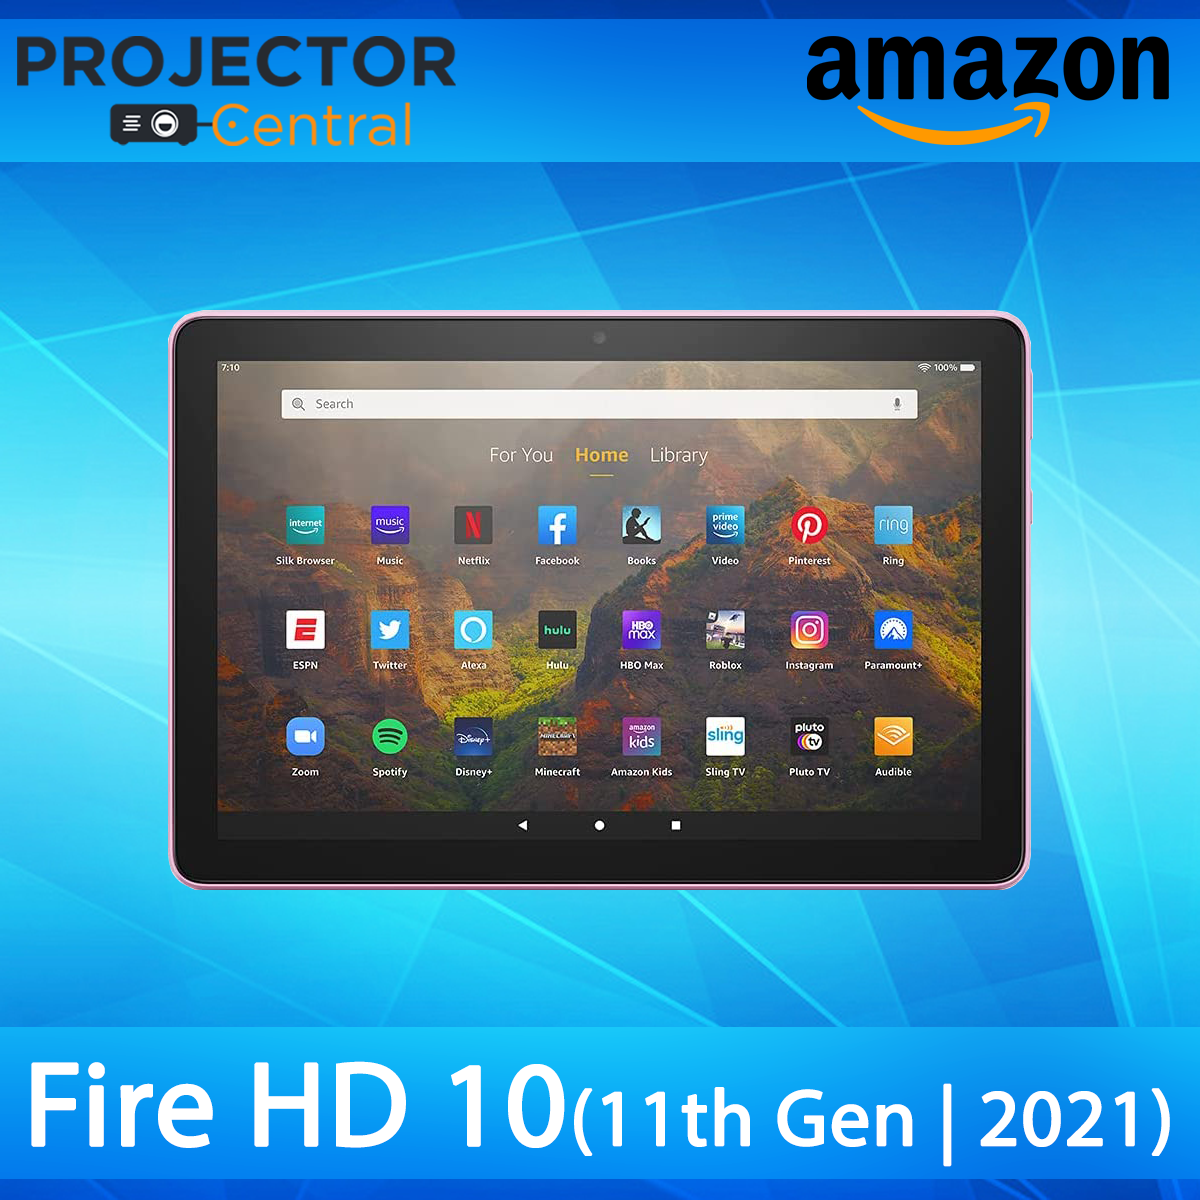 Amazon Fire HD 10 tablet, 10.1", 1080p Full HD, 32GB or 64GB and Introducing Fire HD 10 Plus tablet, 10.1", 1080p Full HD, 32GB or 64GB (11th Gen | 2021 Release)